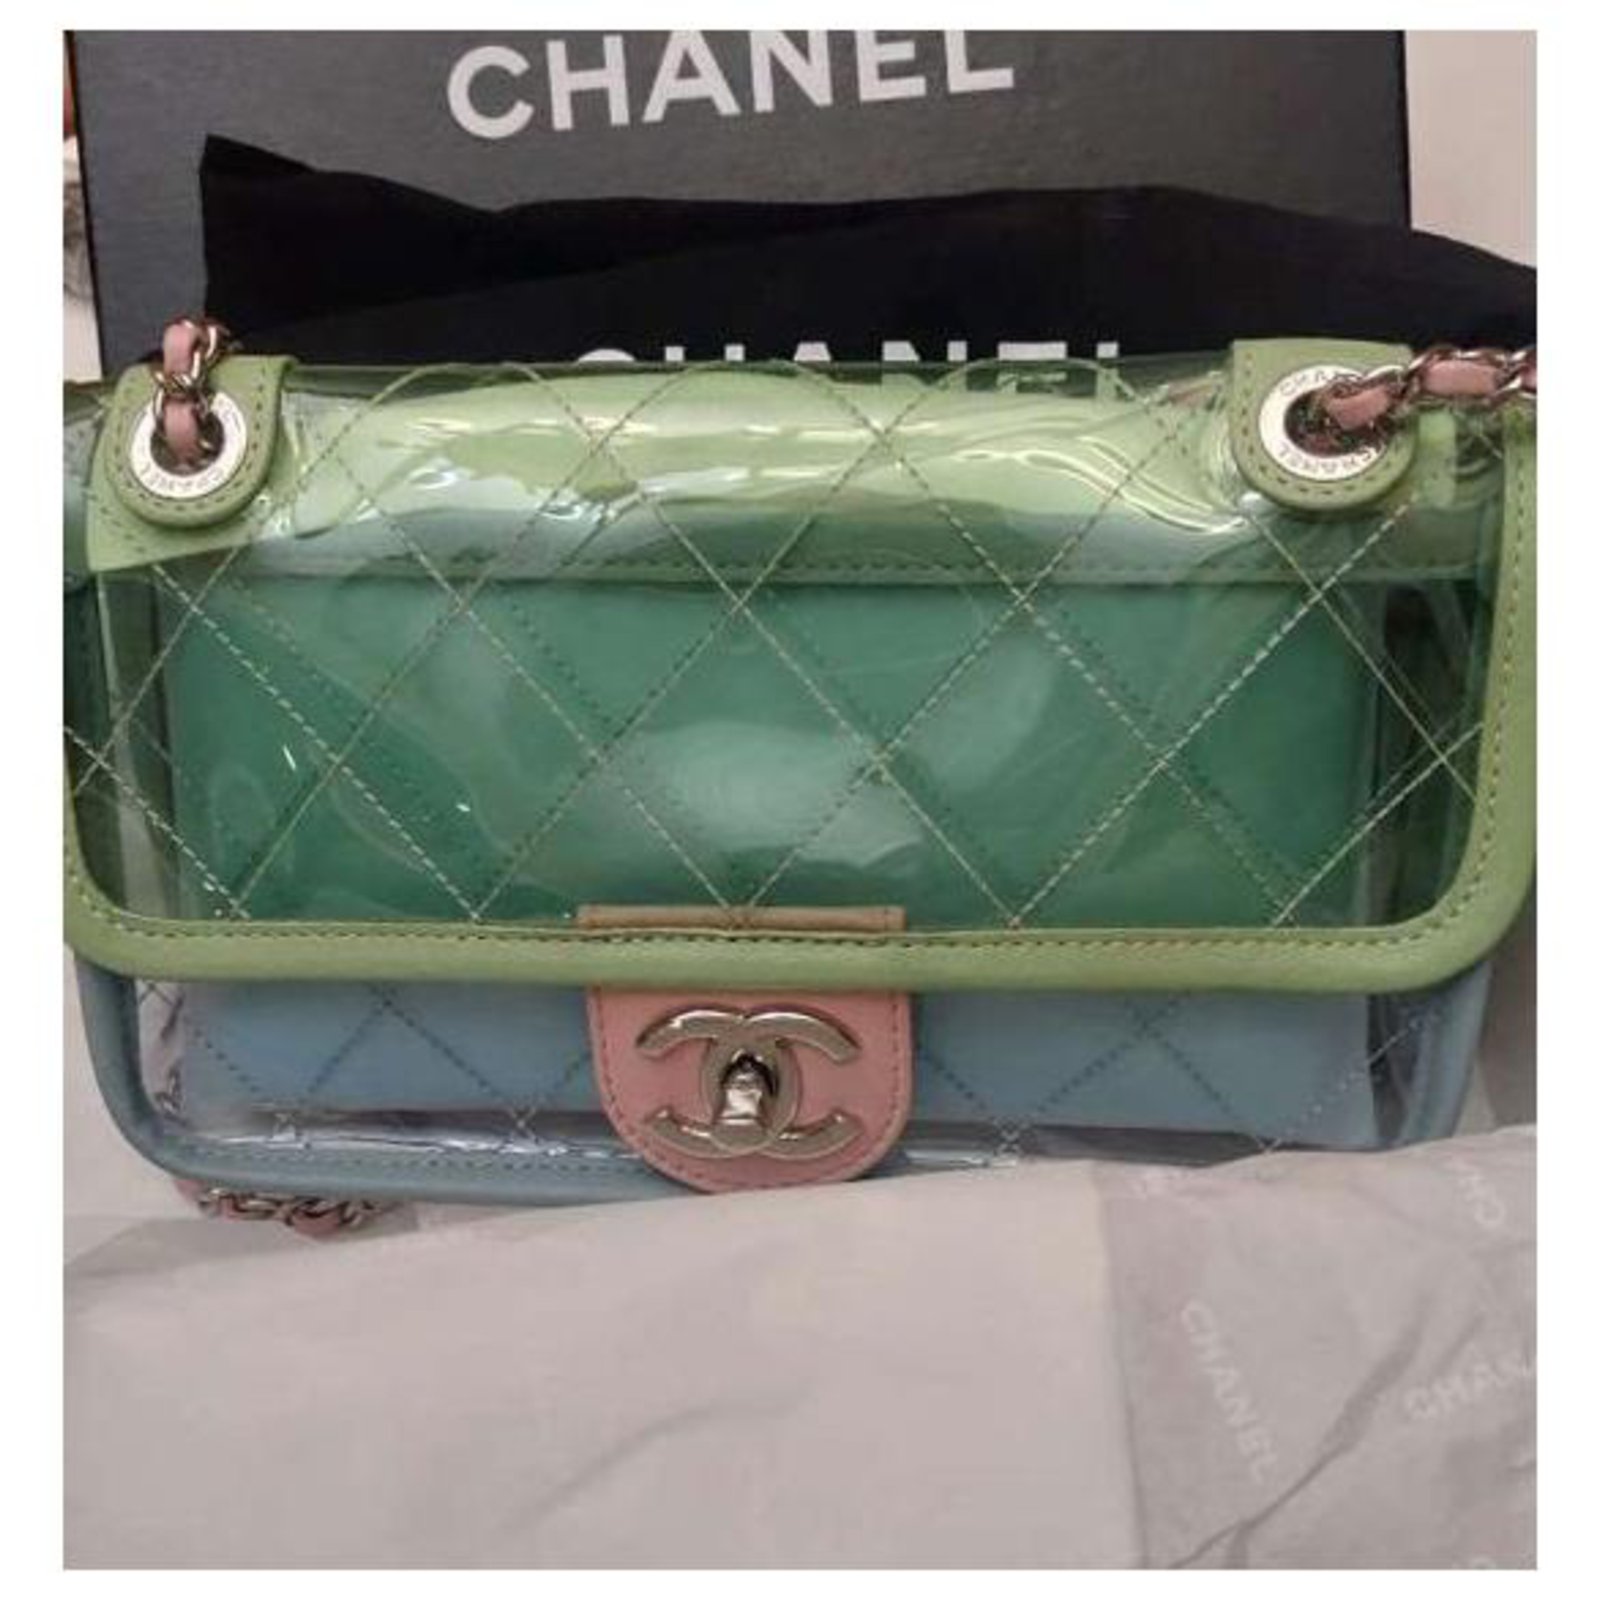 Fashionphile - One of our favorite transparent bags, the Chanel Lambskin  PVC Quilted Mini Coco Splash Flap in Blue Green. Shop our other Clearly  Cute Bags